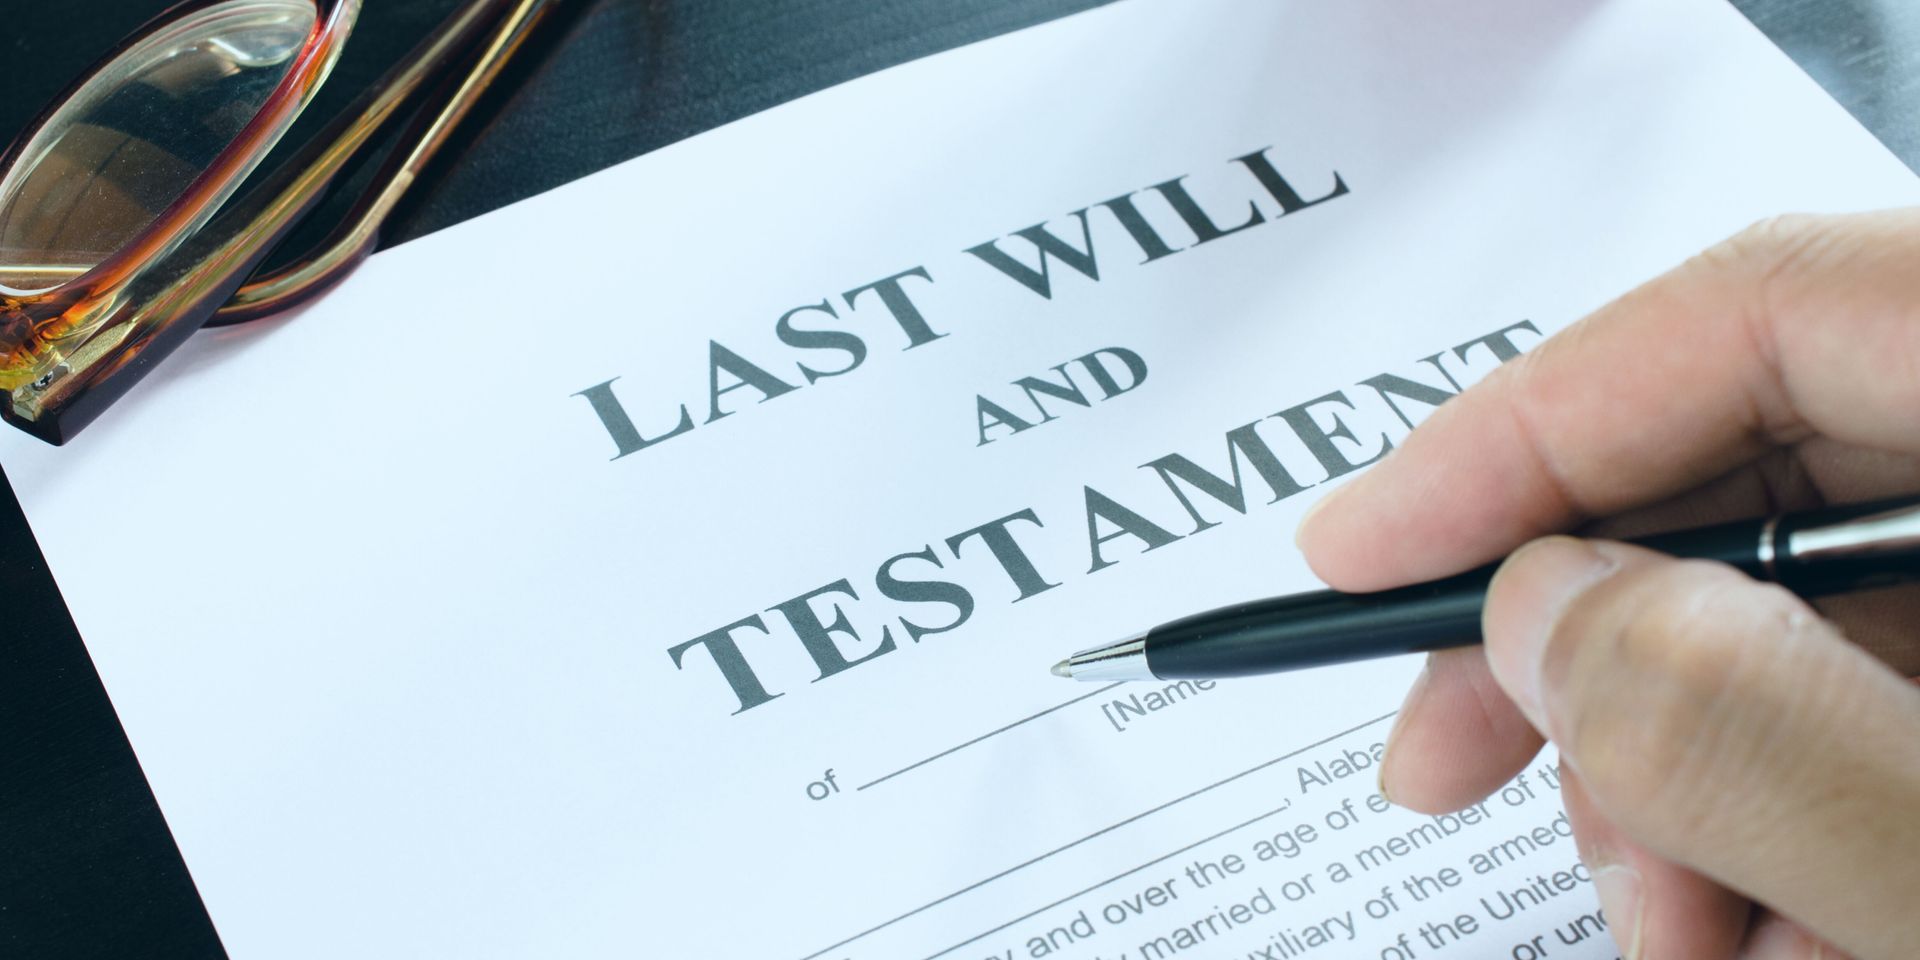 Does Having a Last Will & Testament Avoid Probate?